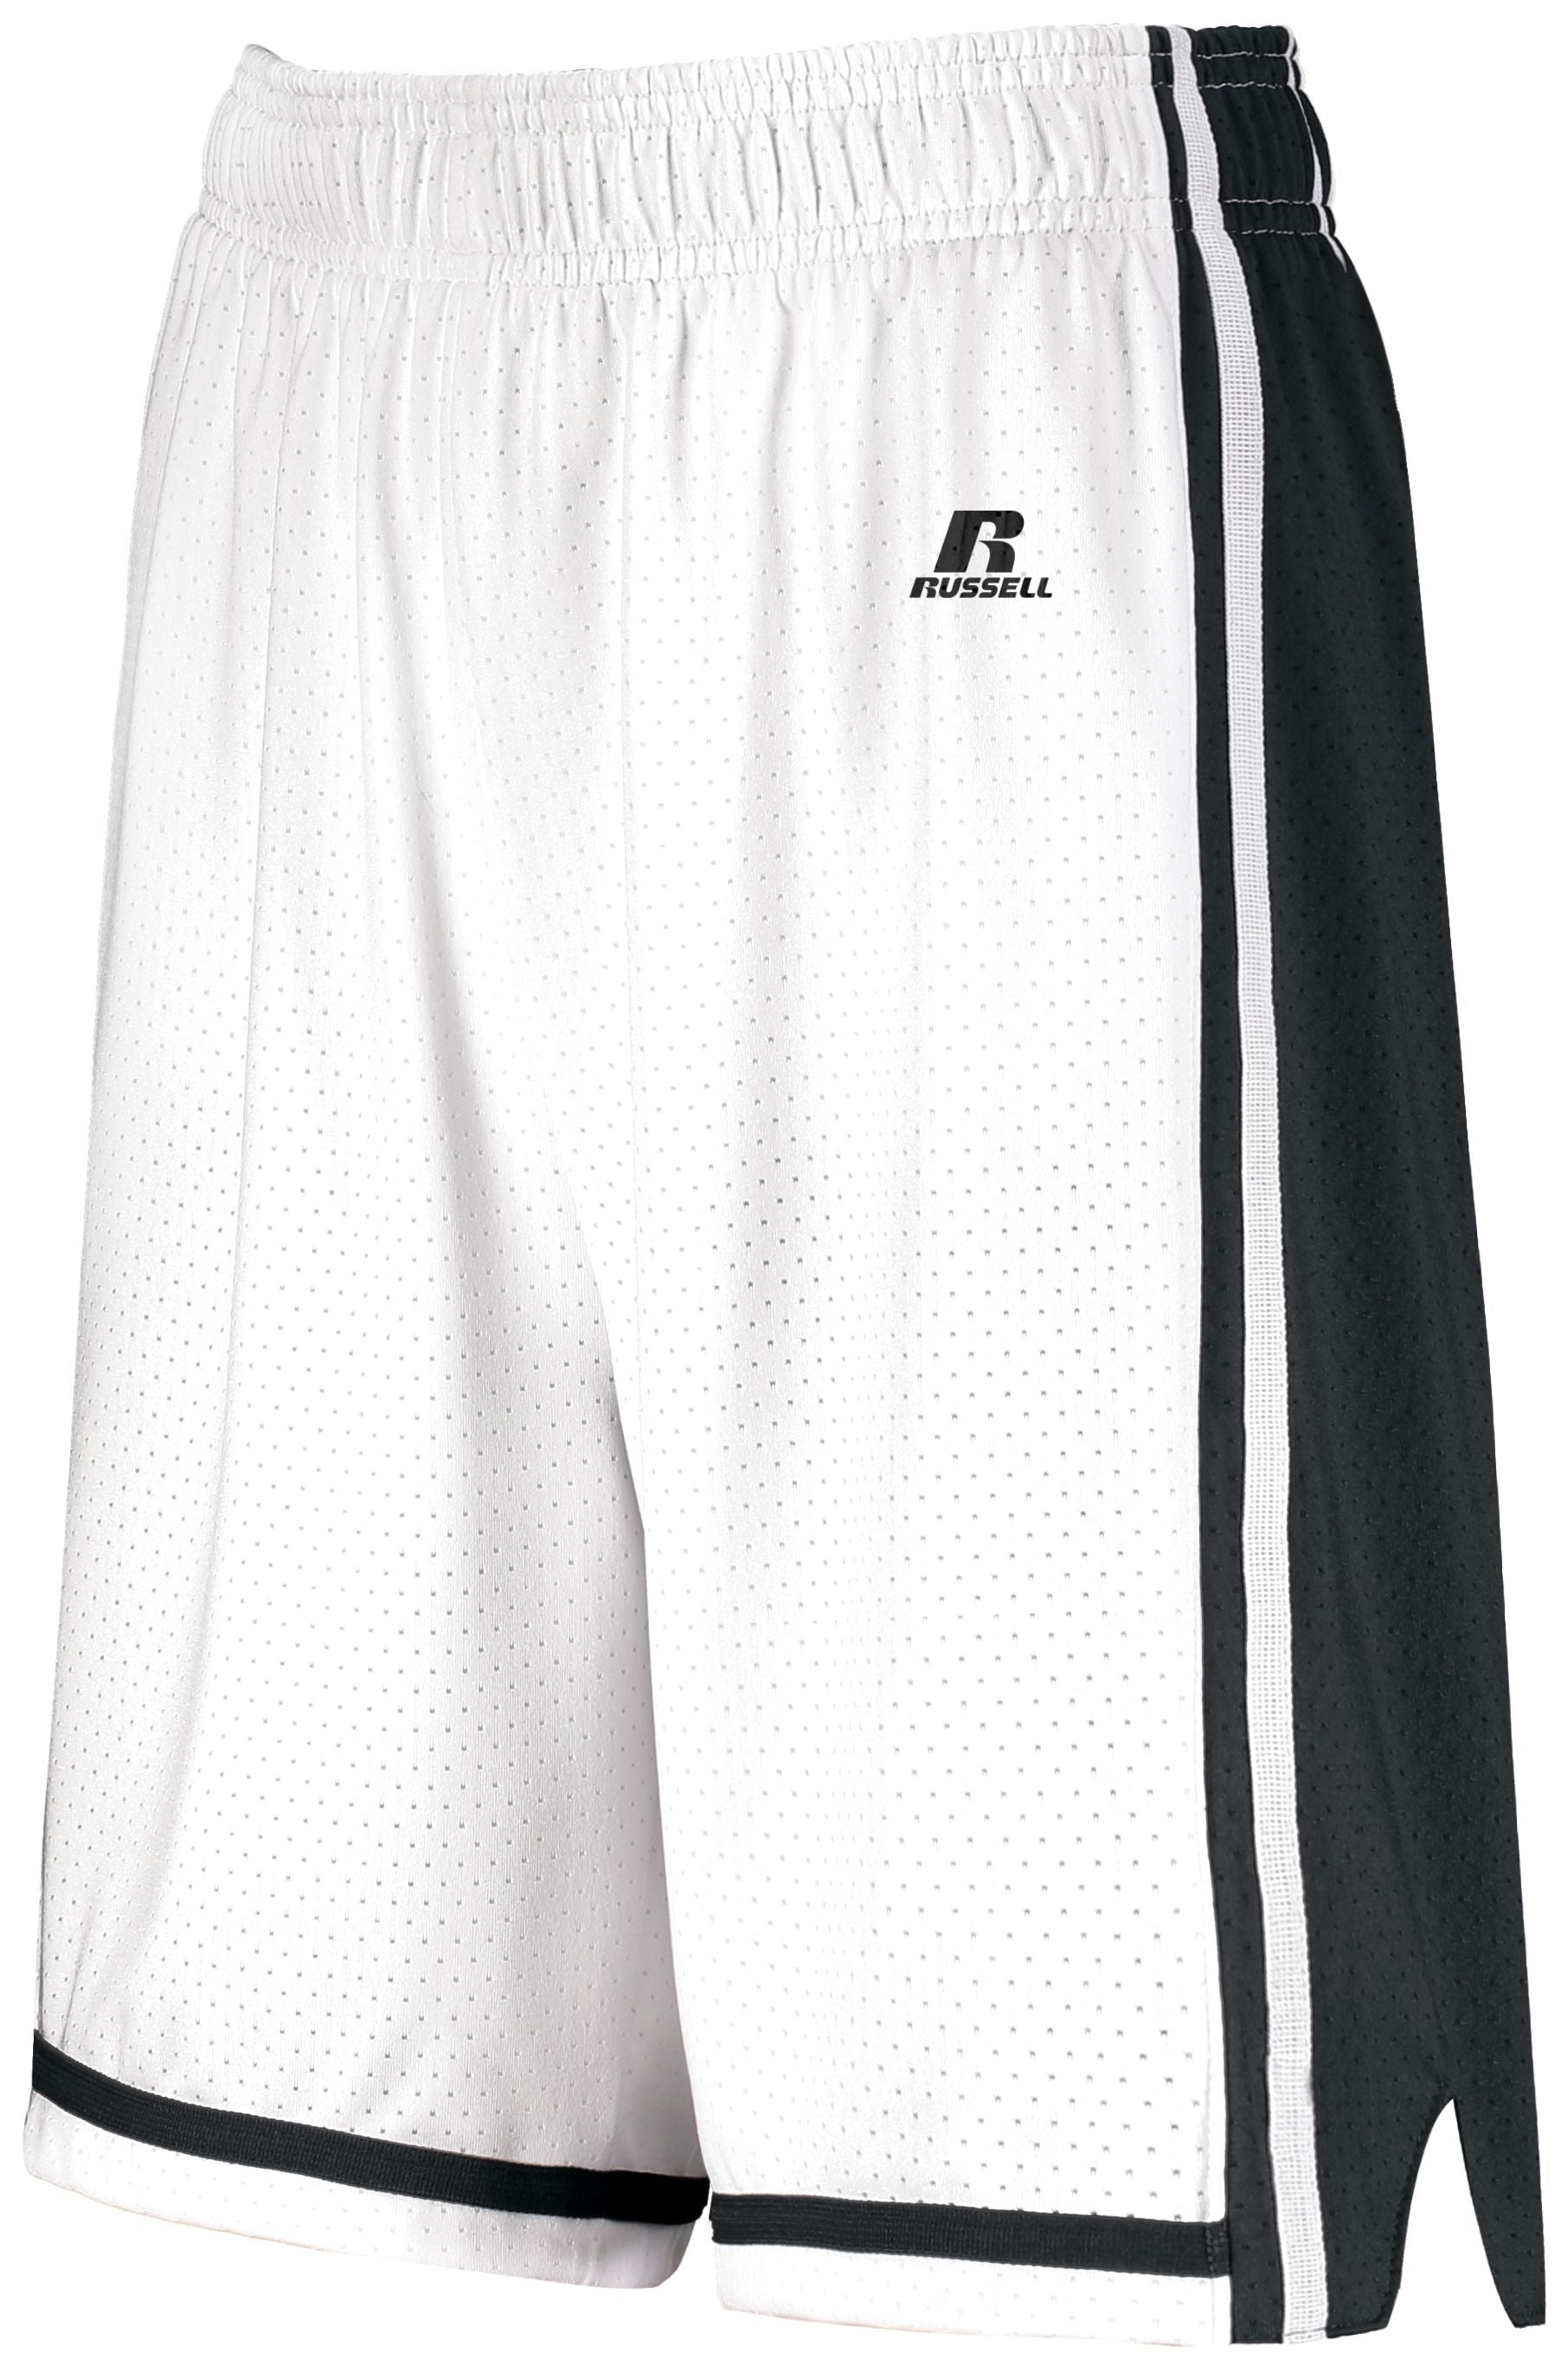 Russell Athletic Ladies Legacy Basketball Shorts in White/Black  -Part of the Ladies, Ladies-Shorts, Basketball, Russell-Athletic-Products, All-Sports, All-Sports-1 product lines at KanaleyCreations.com